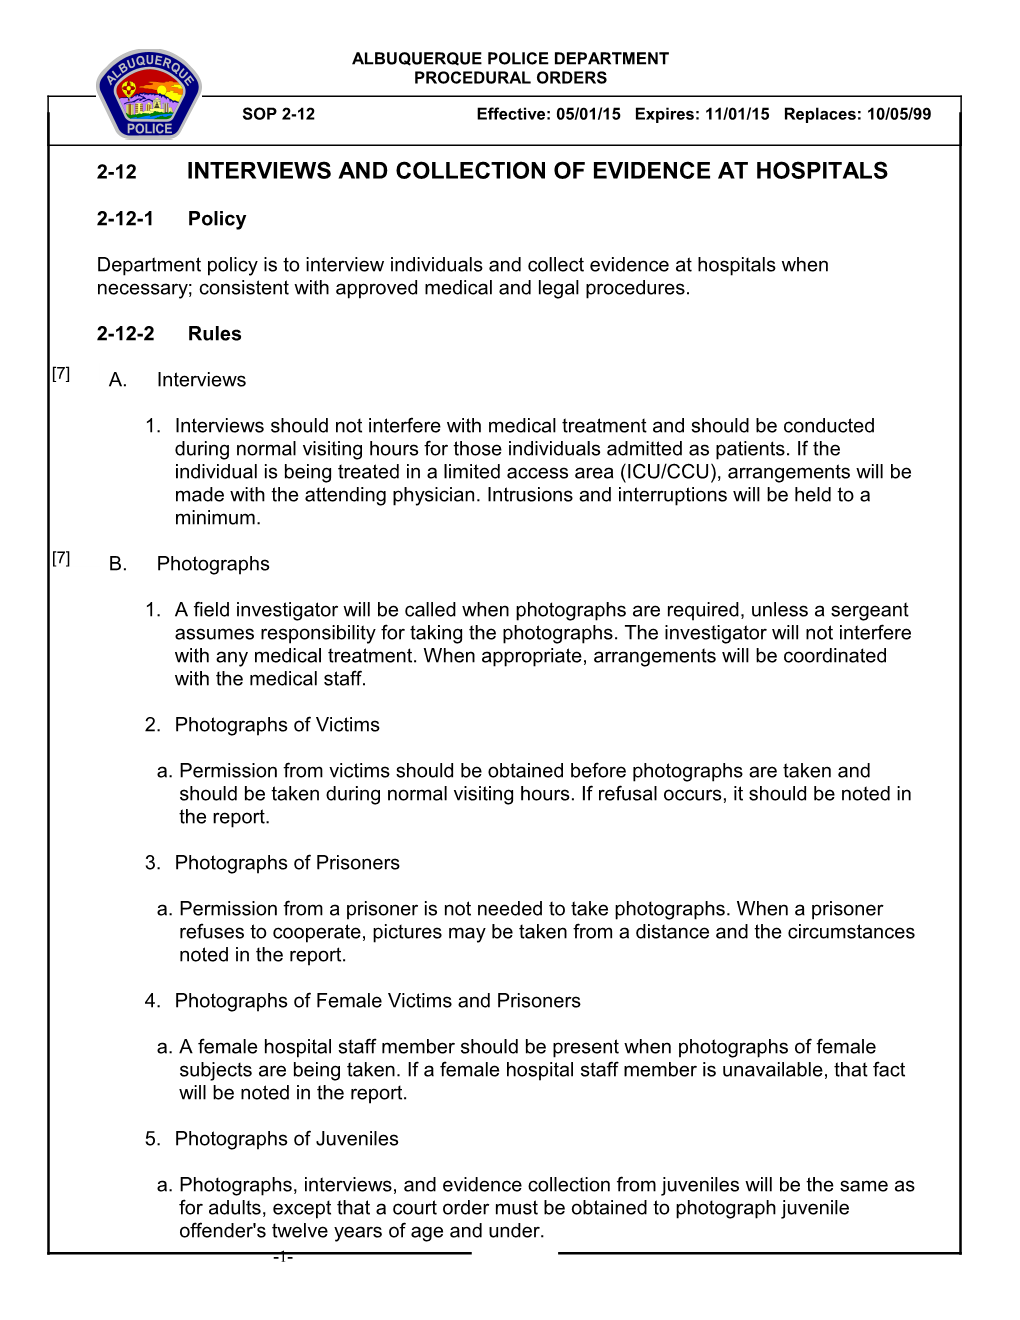 2-12 Interviews and Collection of Evidence at Hospitals